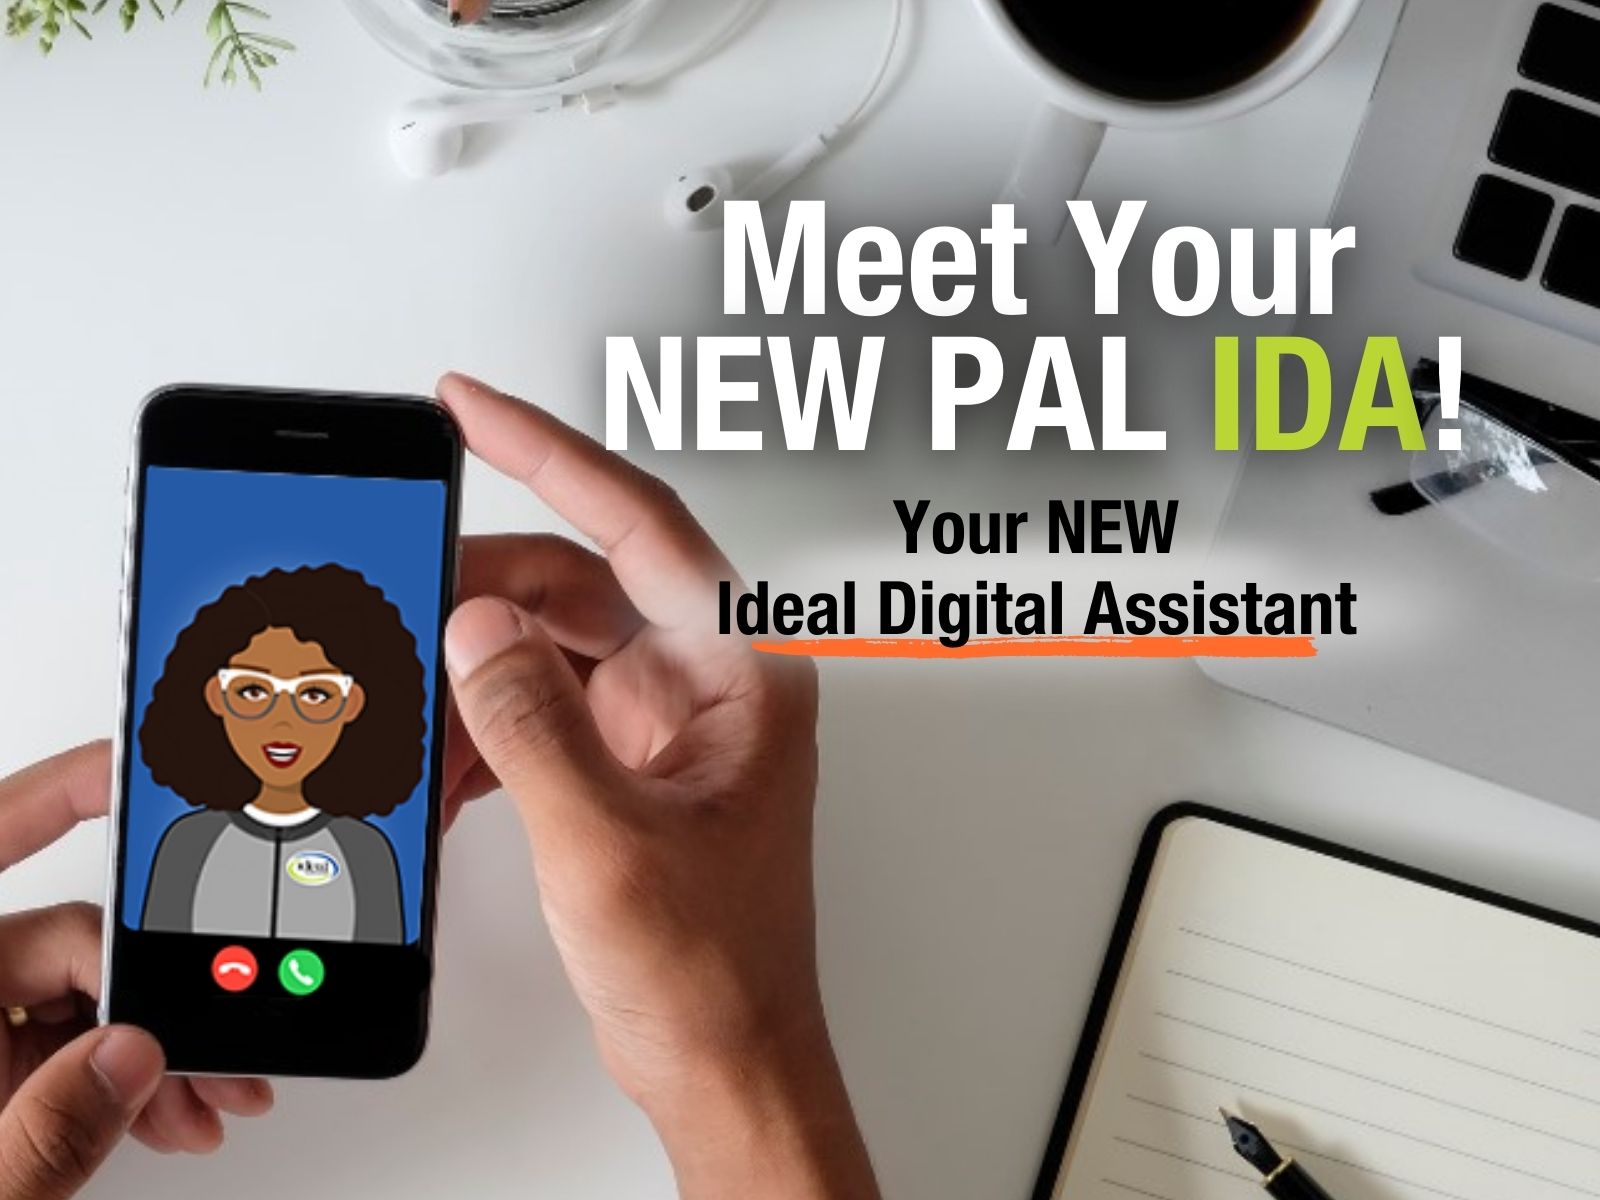 Meet Your New PAL IDA! Your New Ideal Digital Assistant